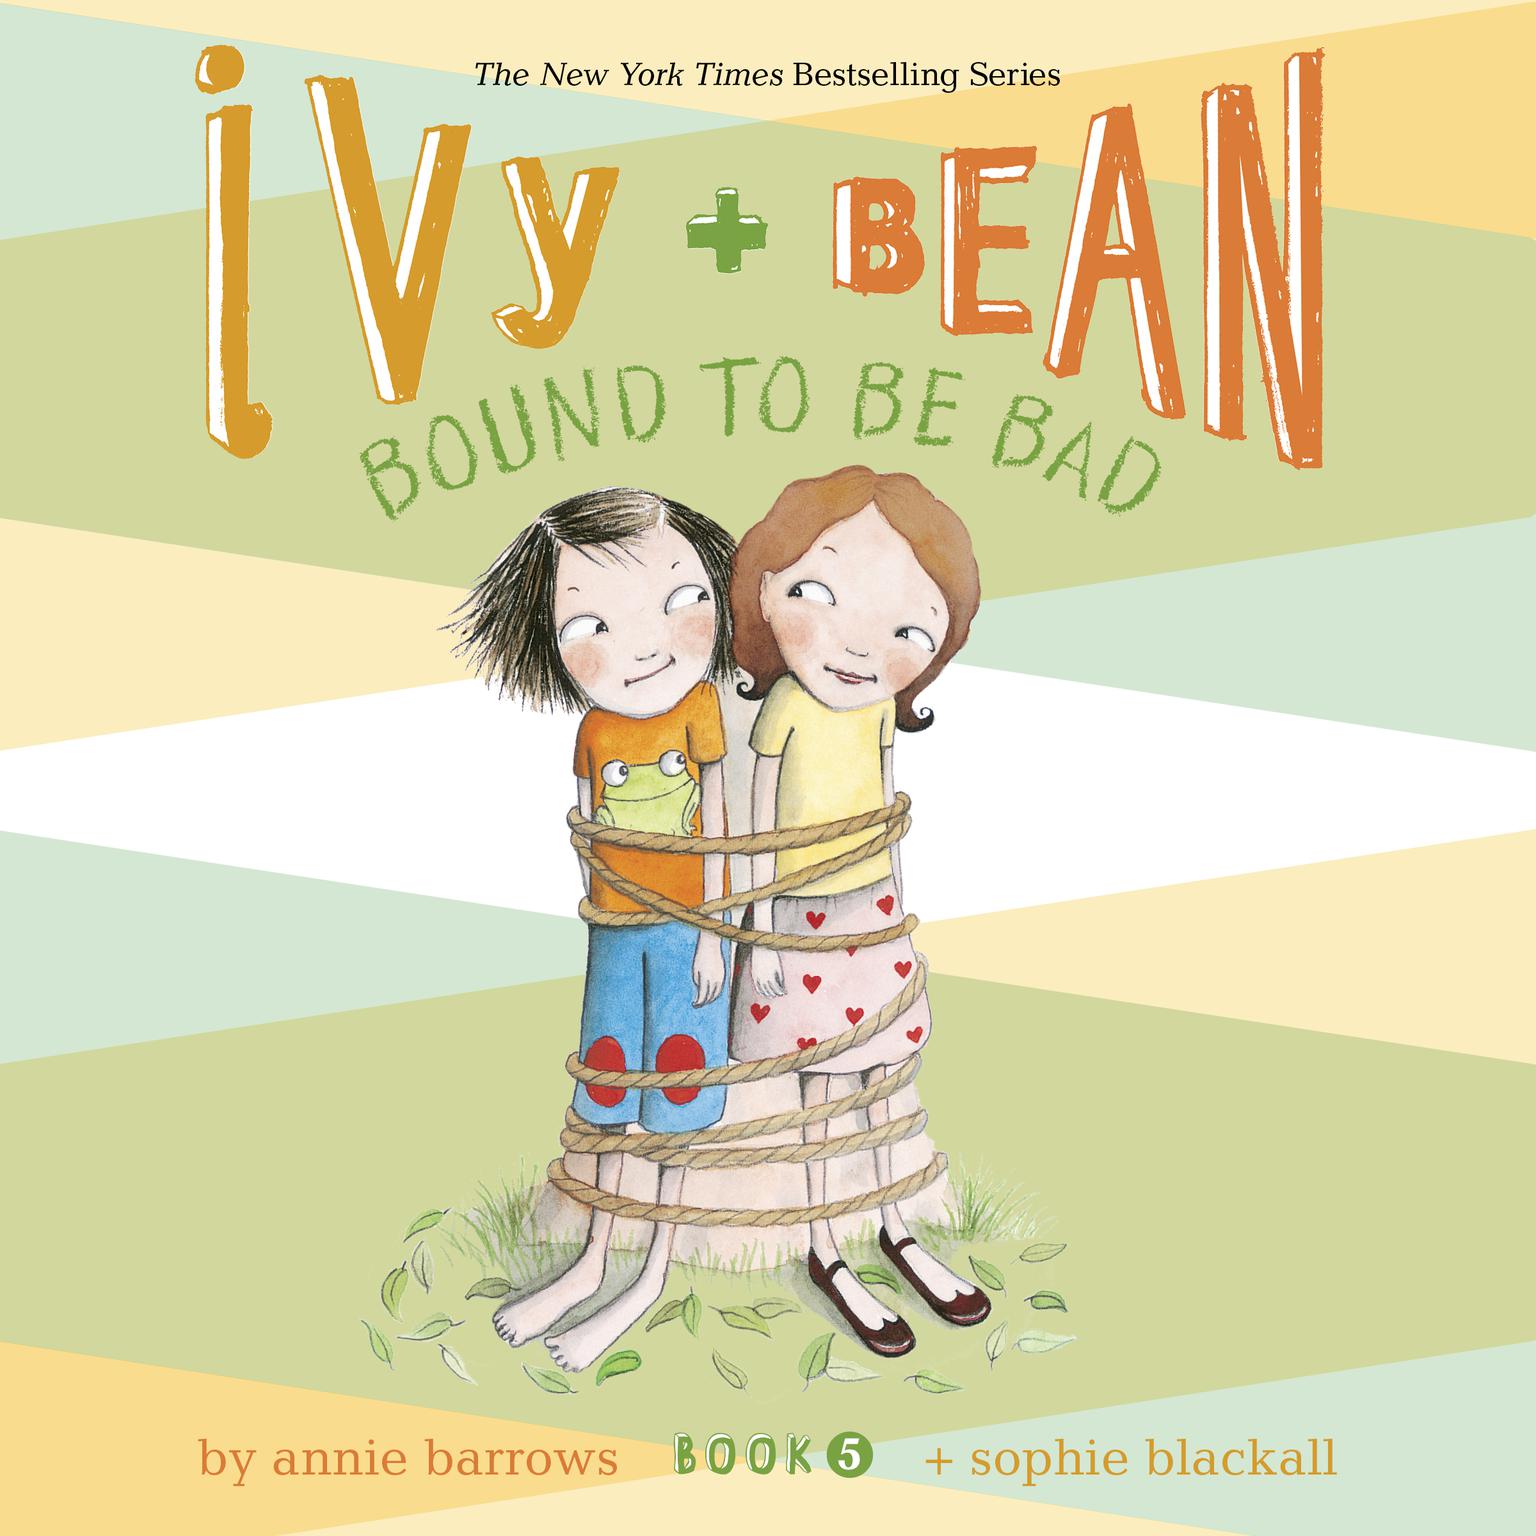 Ivy & Bean Bound to Be Bad (Book 5) Audiobook, by Annie Barrows